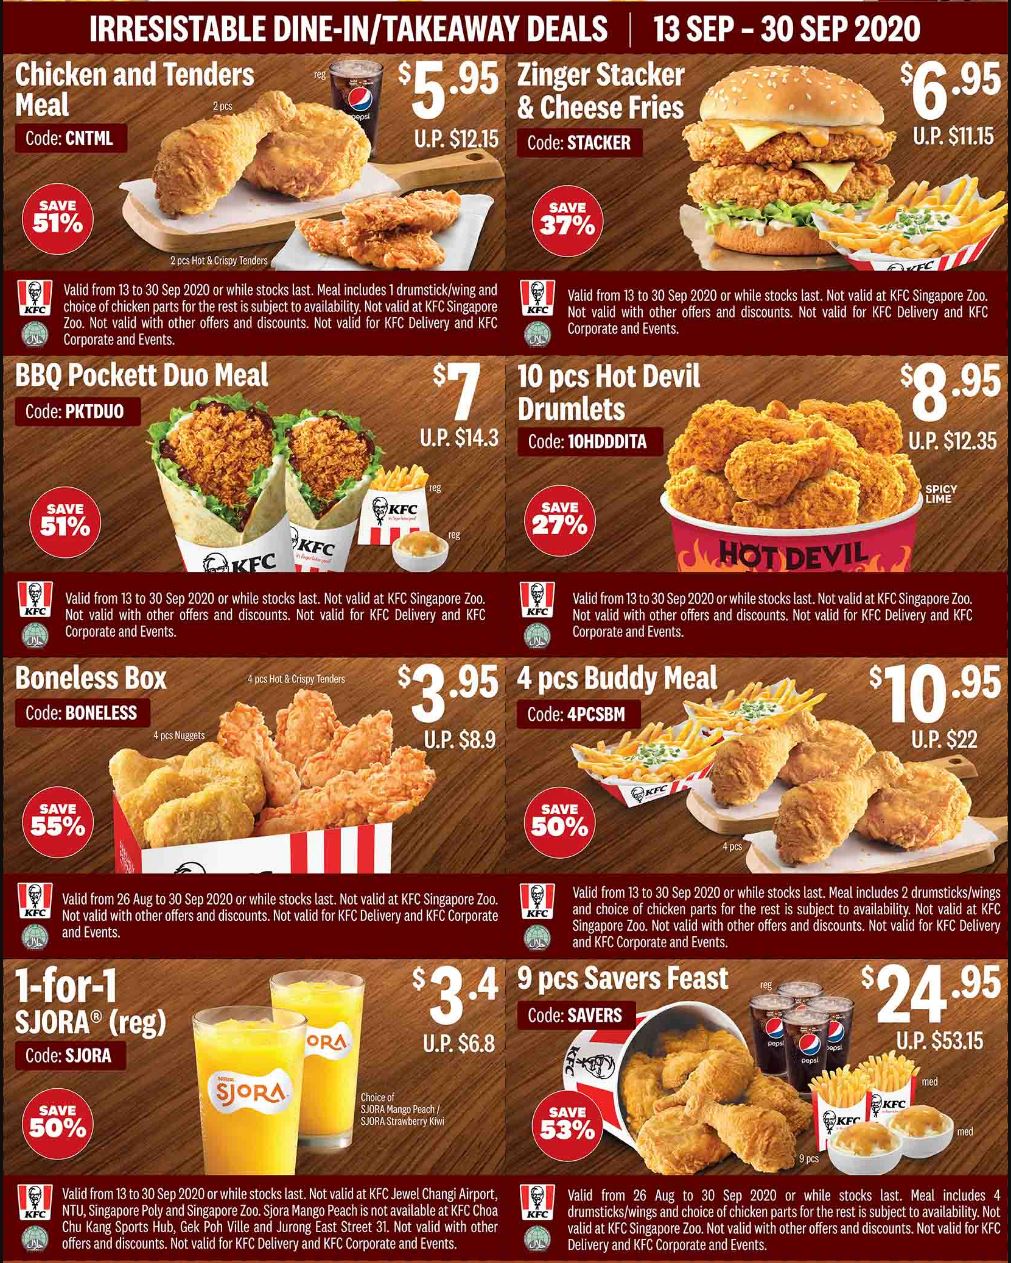 Here are the latest KFC Coupons for dine-in, takeaway and delivery from 13 – 30 Sep 20 - 2